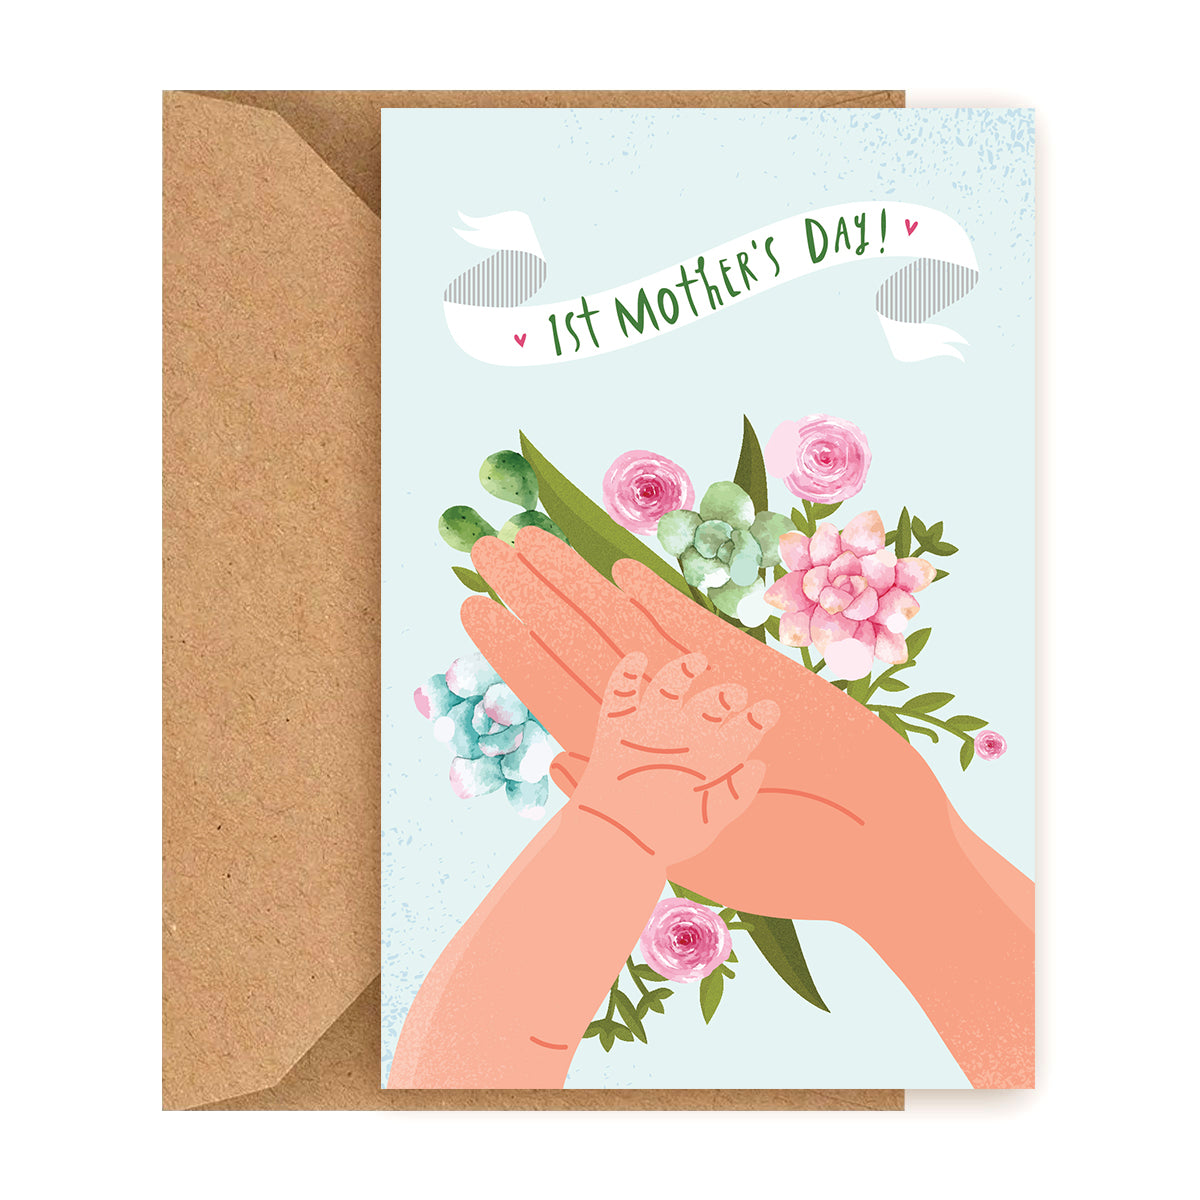 Happy First Mother's Day Card, Happy mother's day cards, Mothers day greeting cards, Mother's day succulent card, Mother's day cards 2023, Mother's Day card ideas